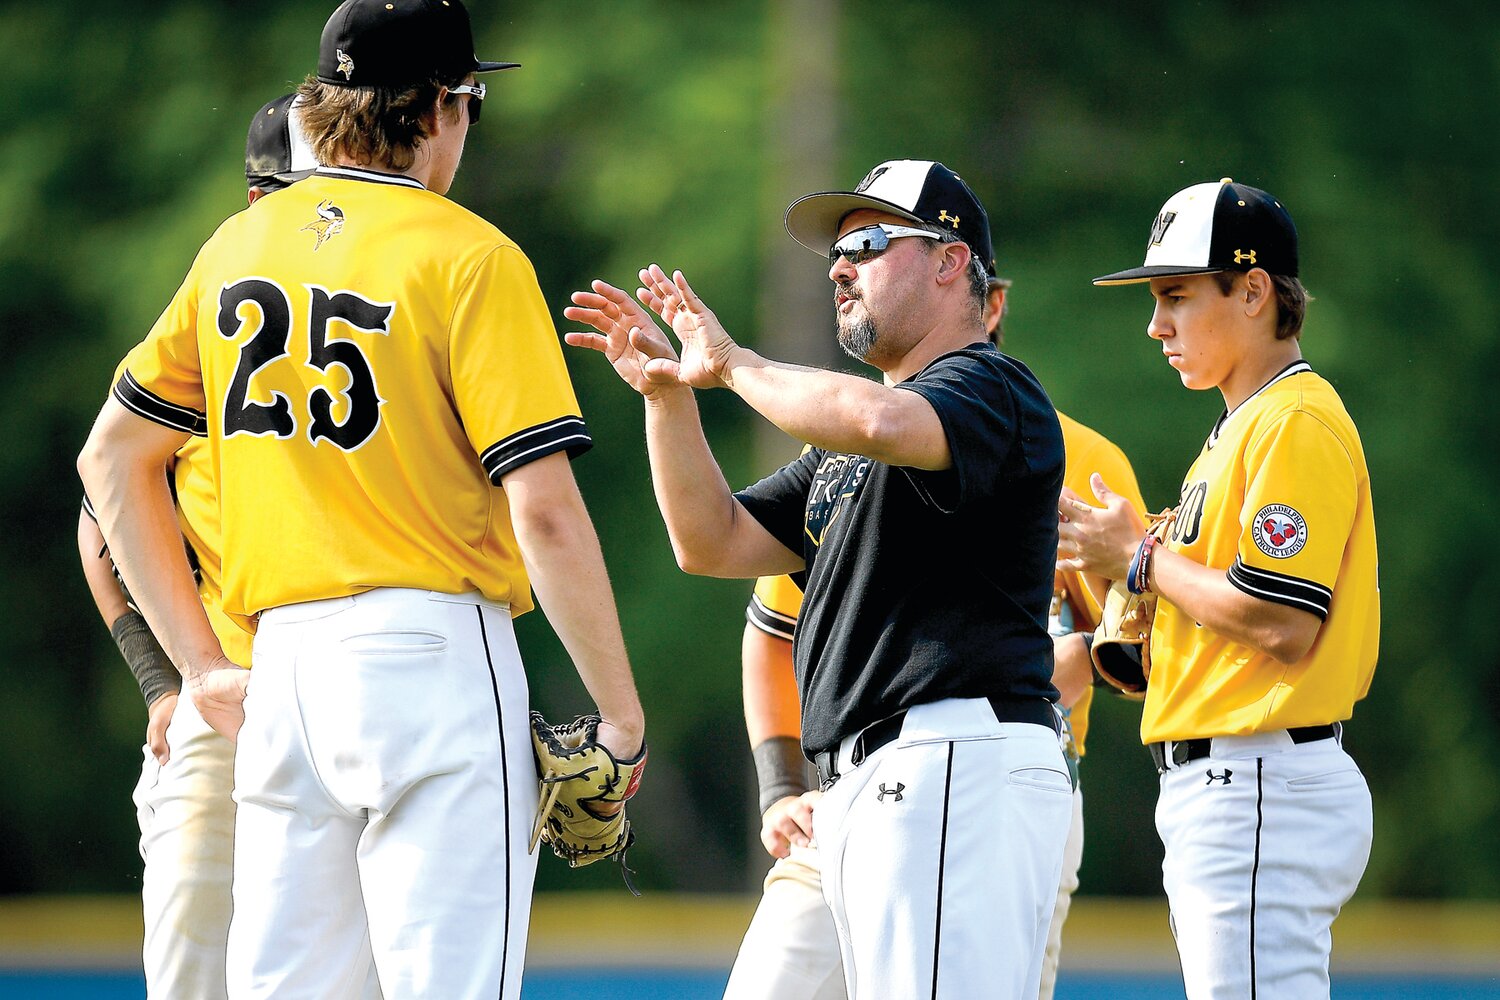 Archbishop Wood manager Jim DiGuiseppe Jr. goes over the defense with the infield during a pitching change in the fourth inning.